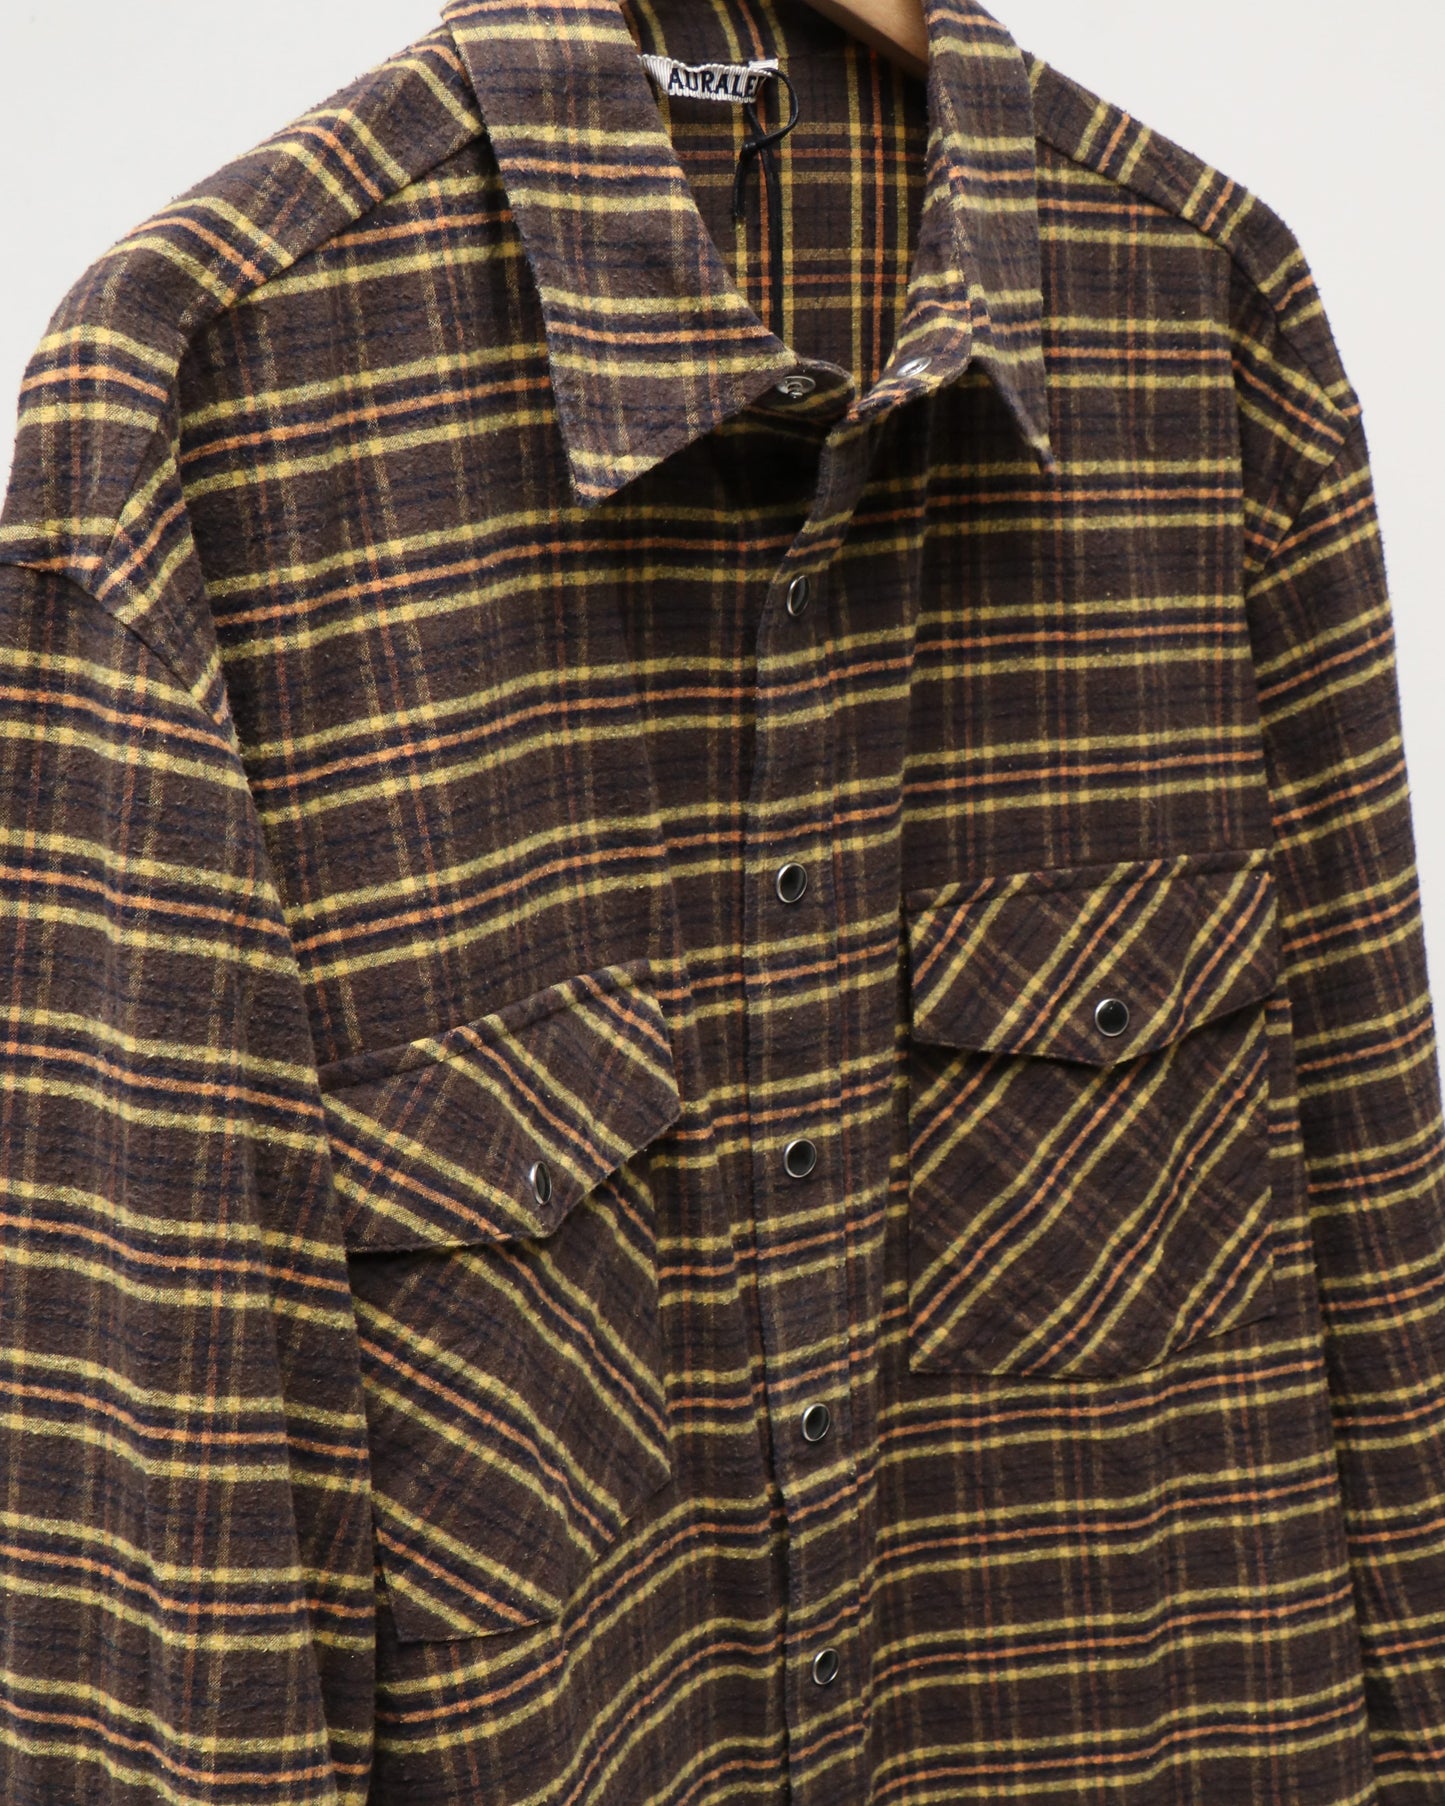 SILK COTTON BRUSHED FLANNEL SHIRT BROWN CHECK